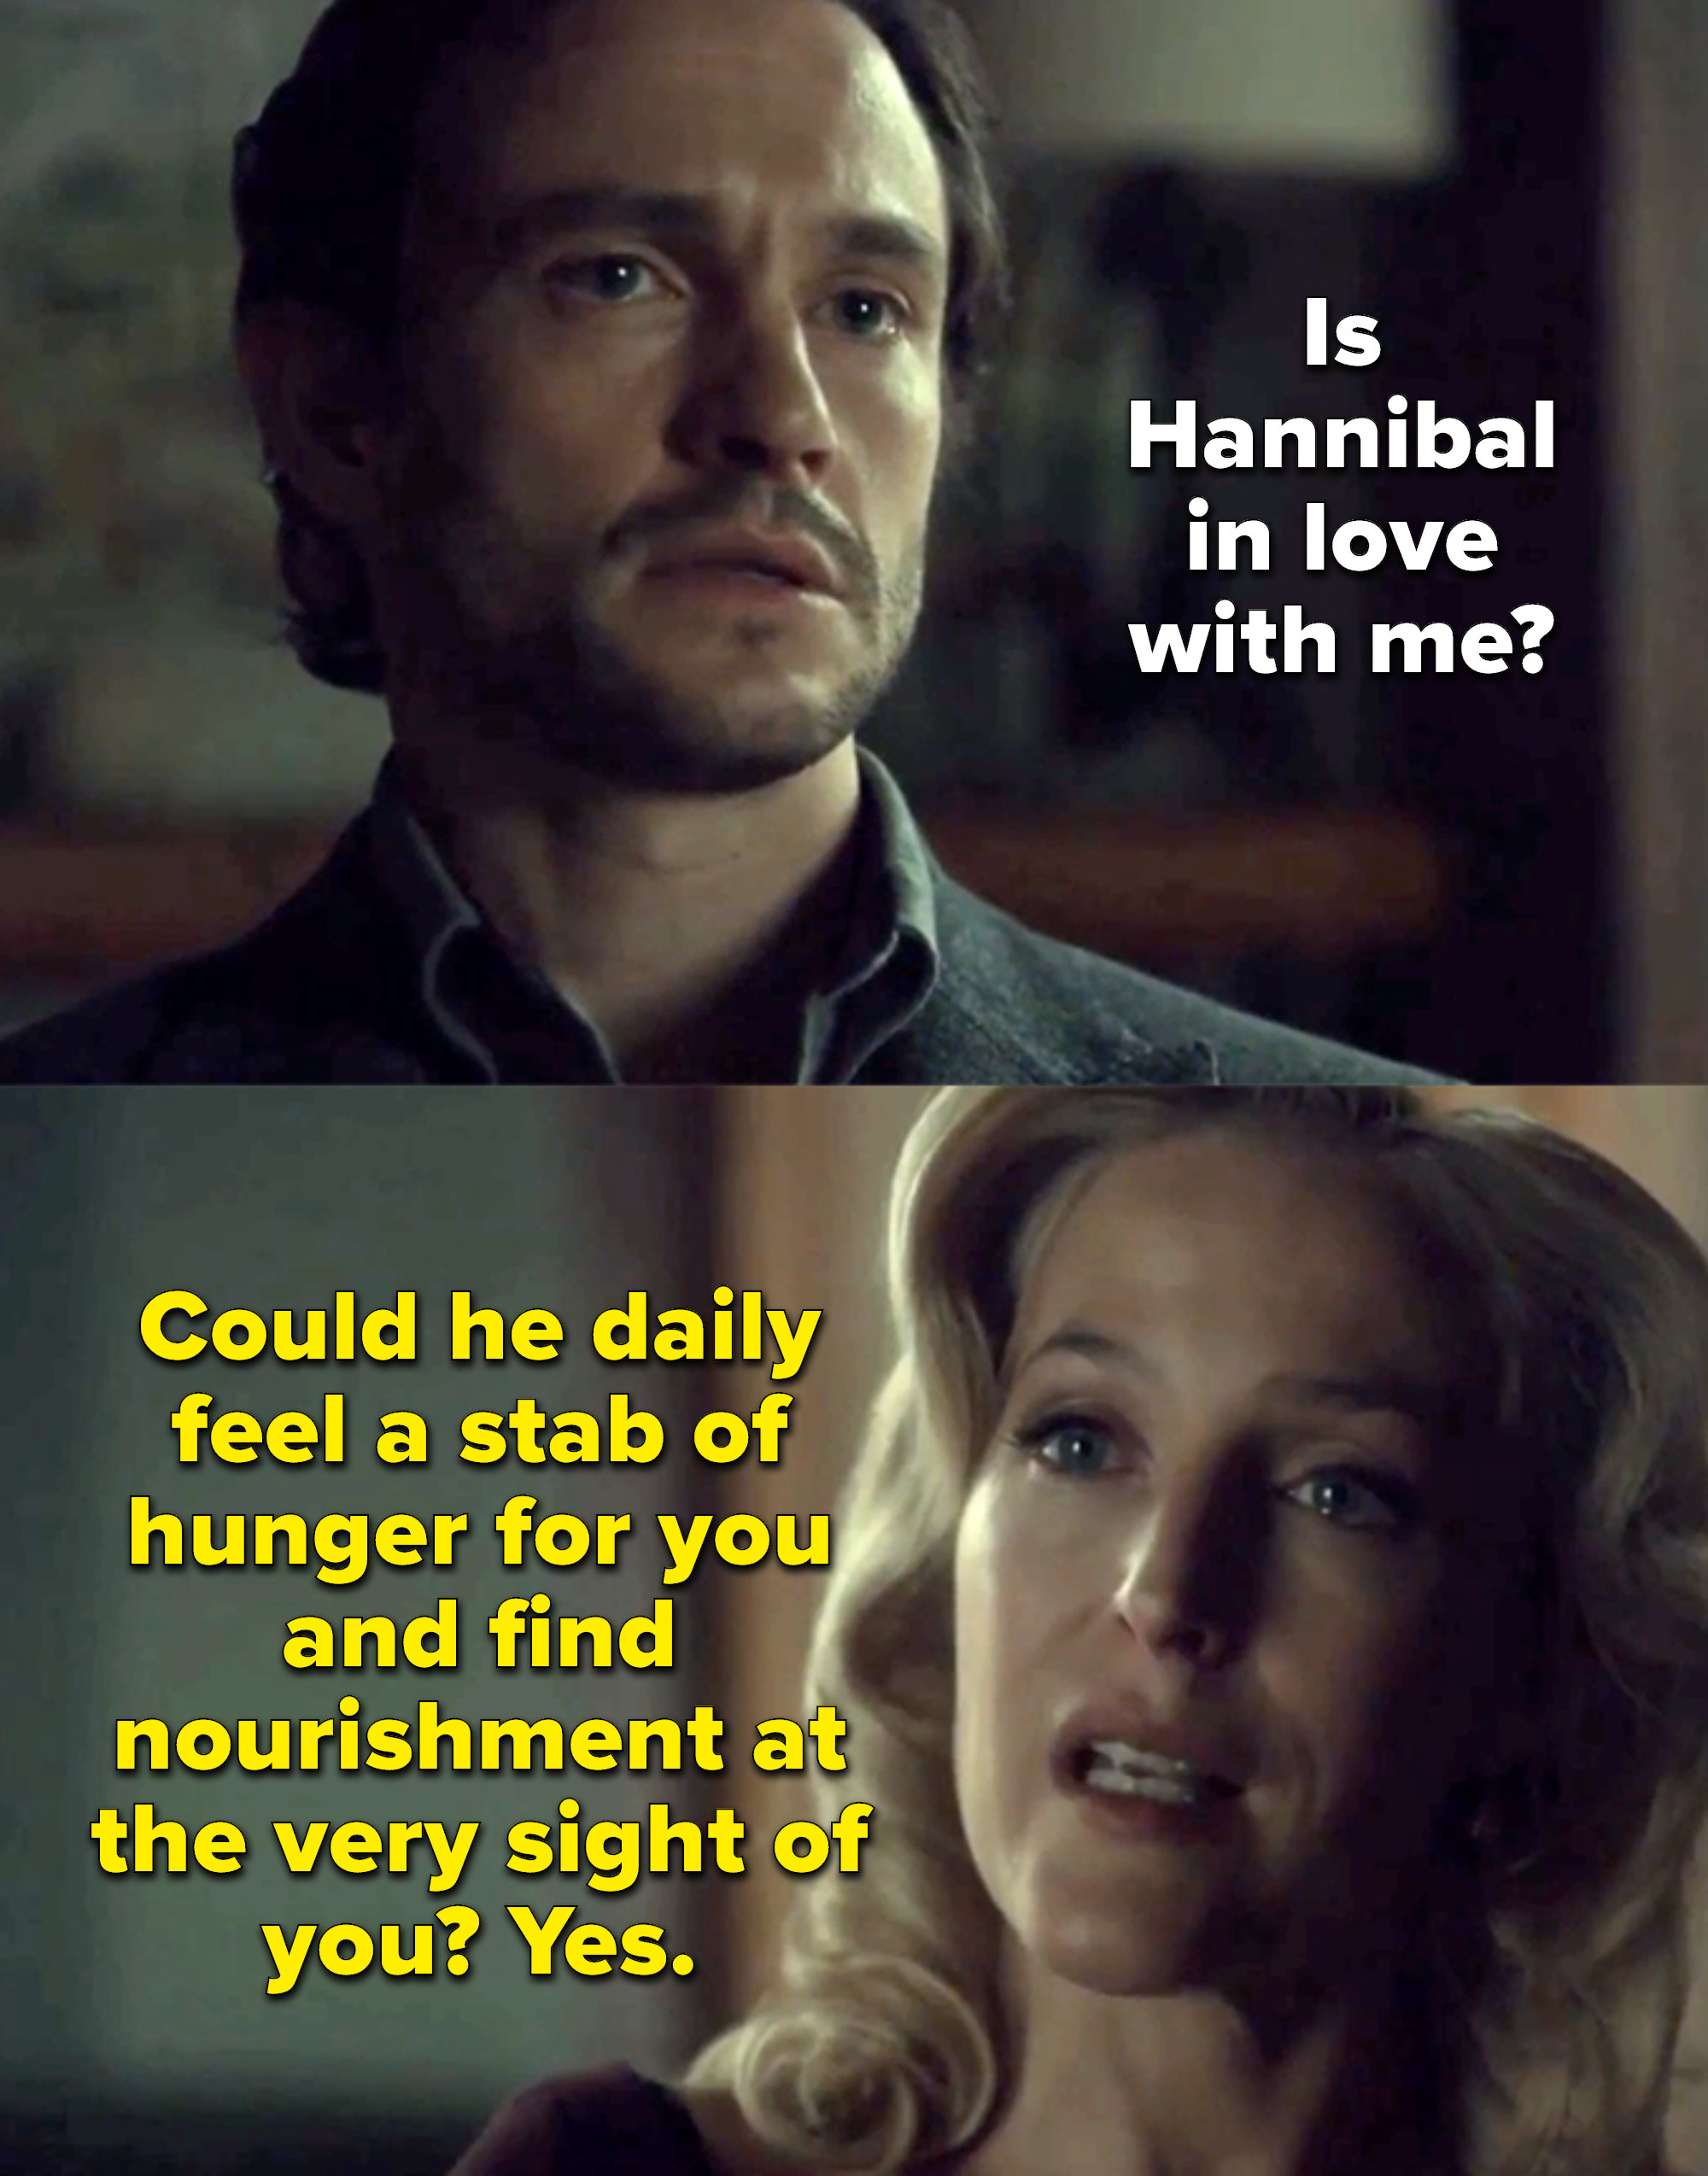 Will asks Bedelia if Hannibal is in love with him, and she says yes